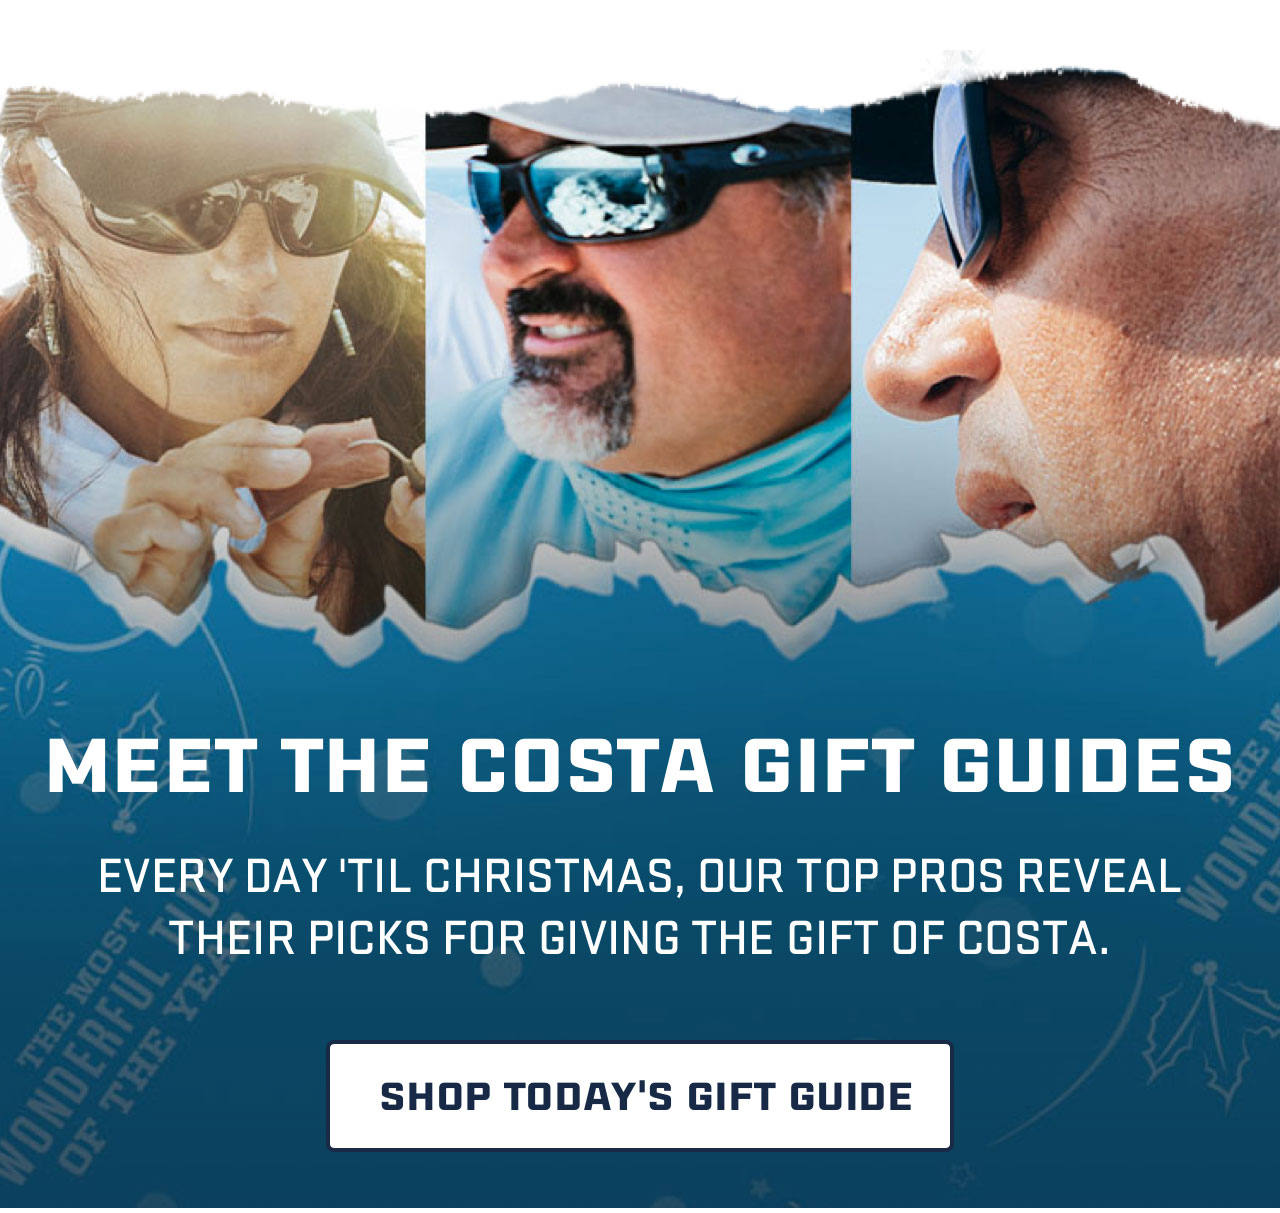 

MEET THE COSTA GIFT GUIDES

EVERY DAY ''TIL CHRISTMAS, OUR TOP PROS REVEAL
THEIR PICKS FOR GIVING THE GIFT OF COSTA.

[ SHOP TODAY''S GIFT GUIDE ]

									